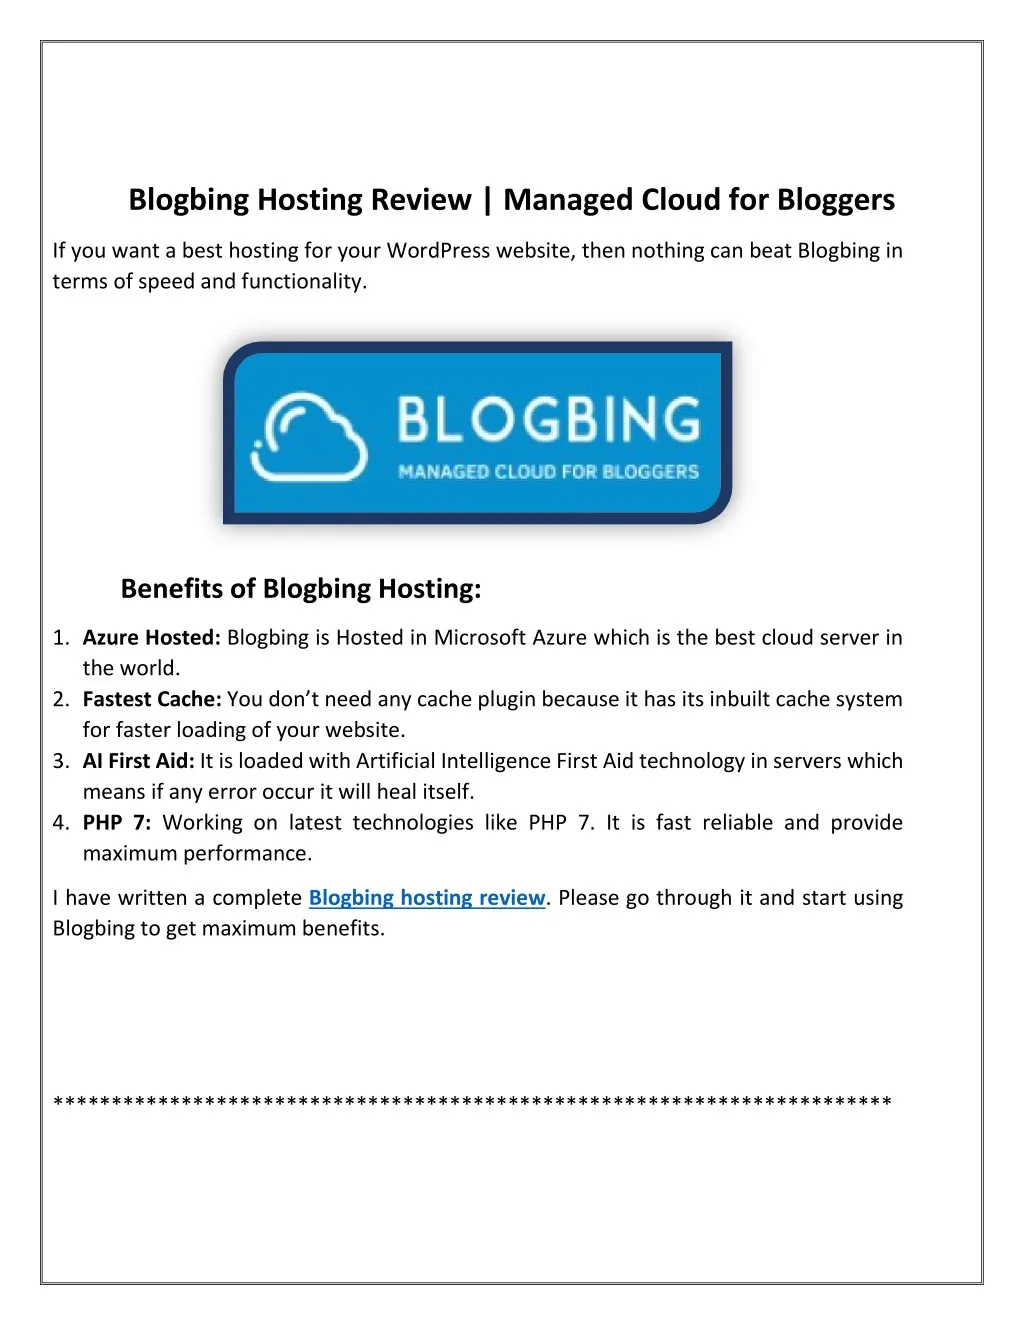 blogbing hosting review managed cloud for bloggers